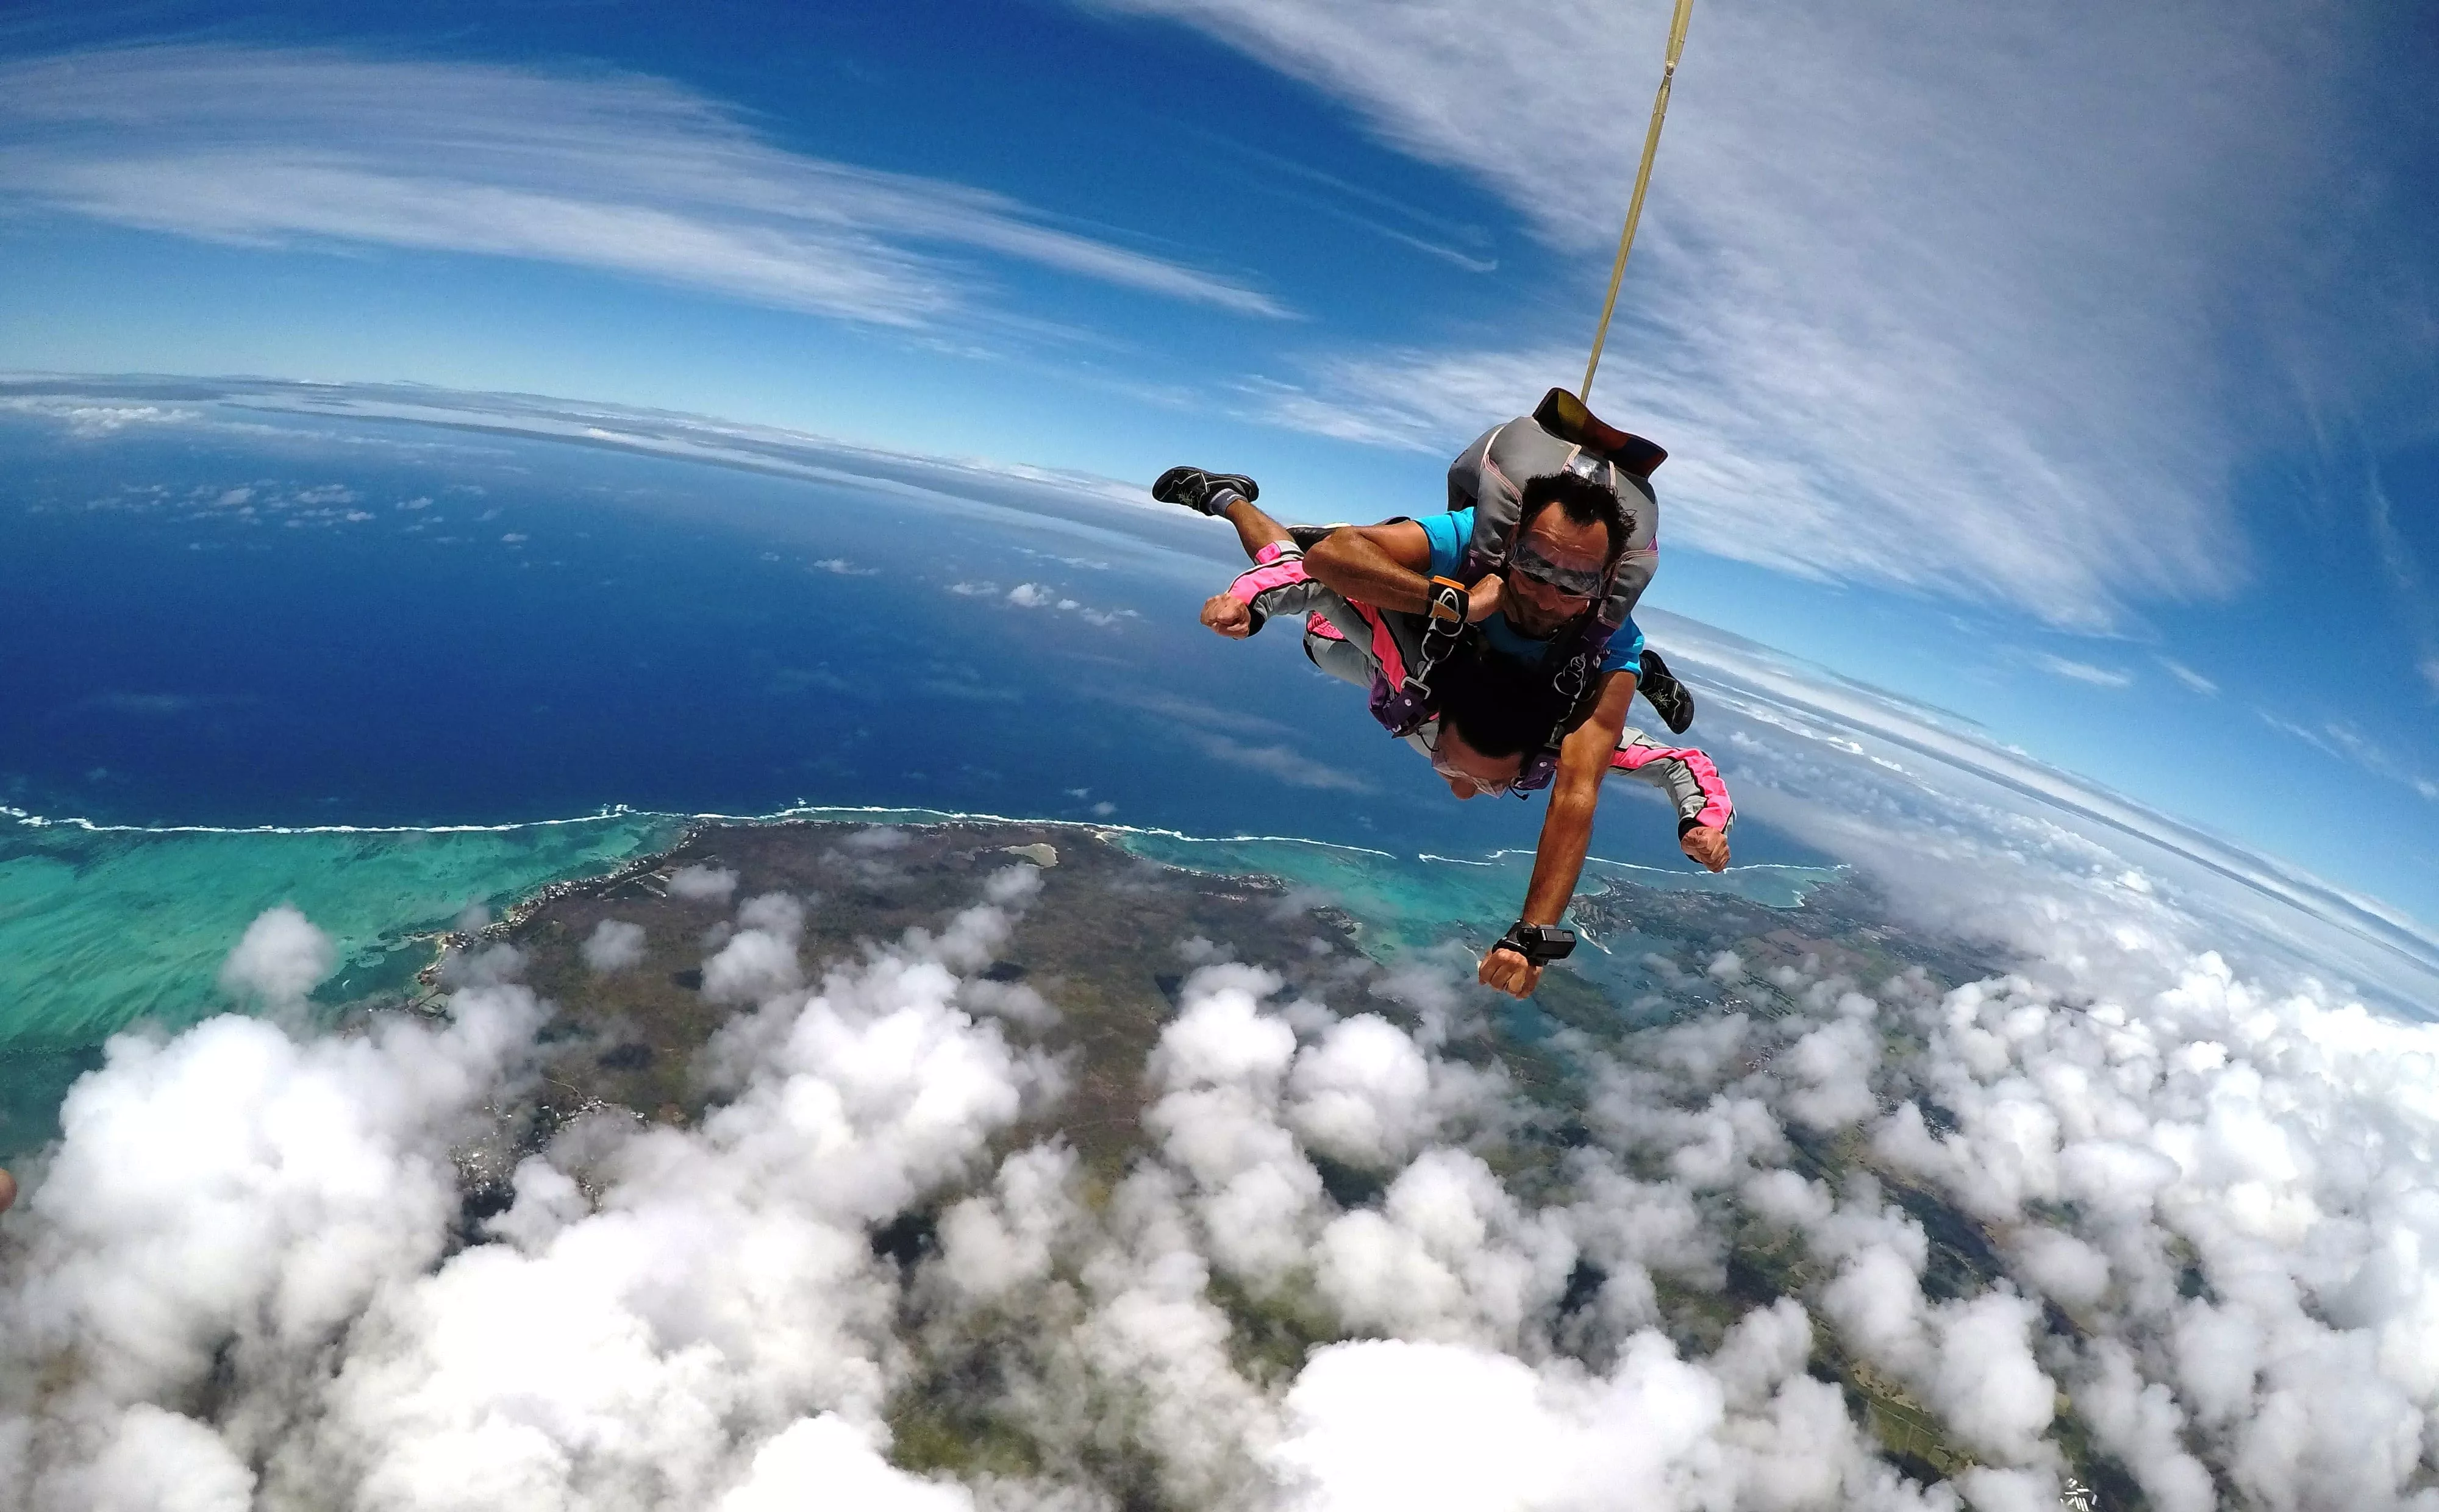 Skydive Mauritius in Mauritius, Africa | Skydiving - Rated 1